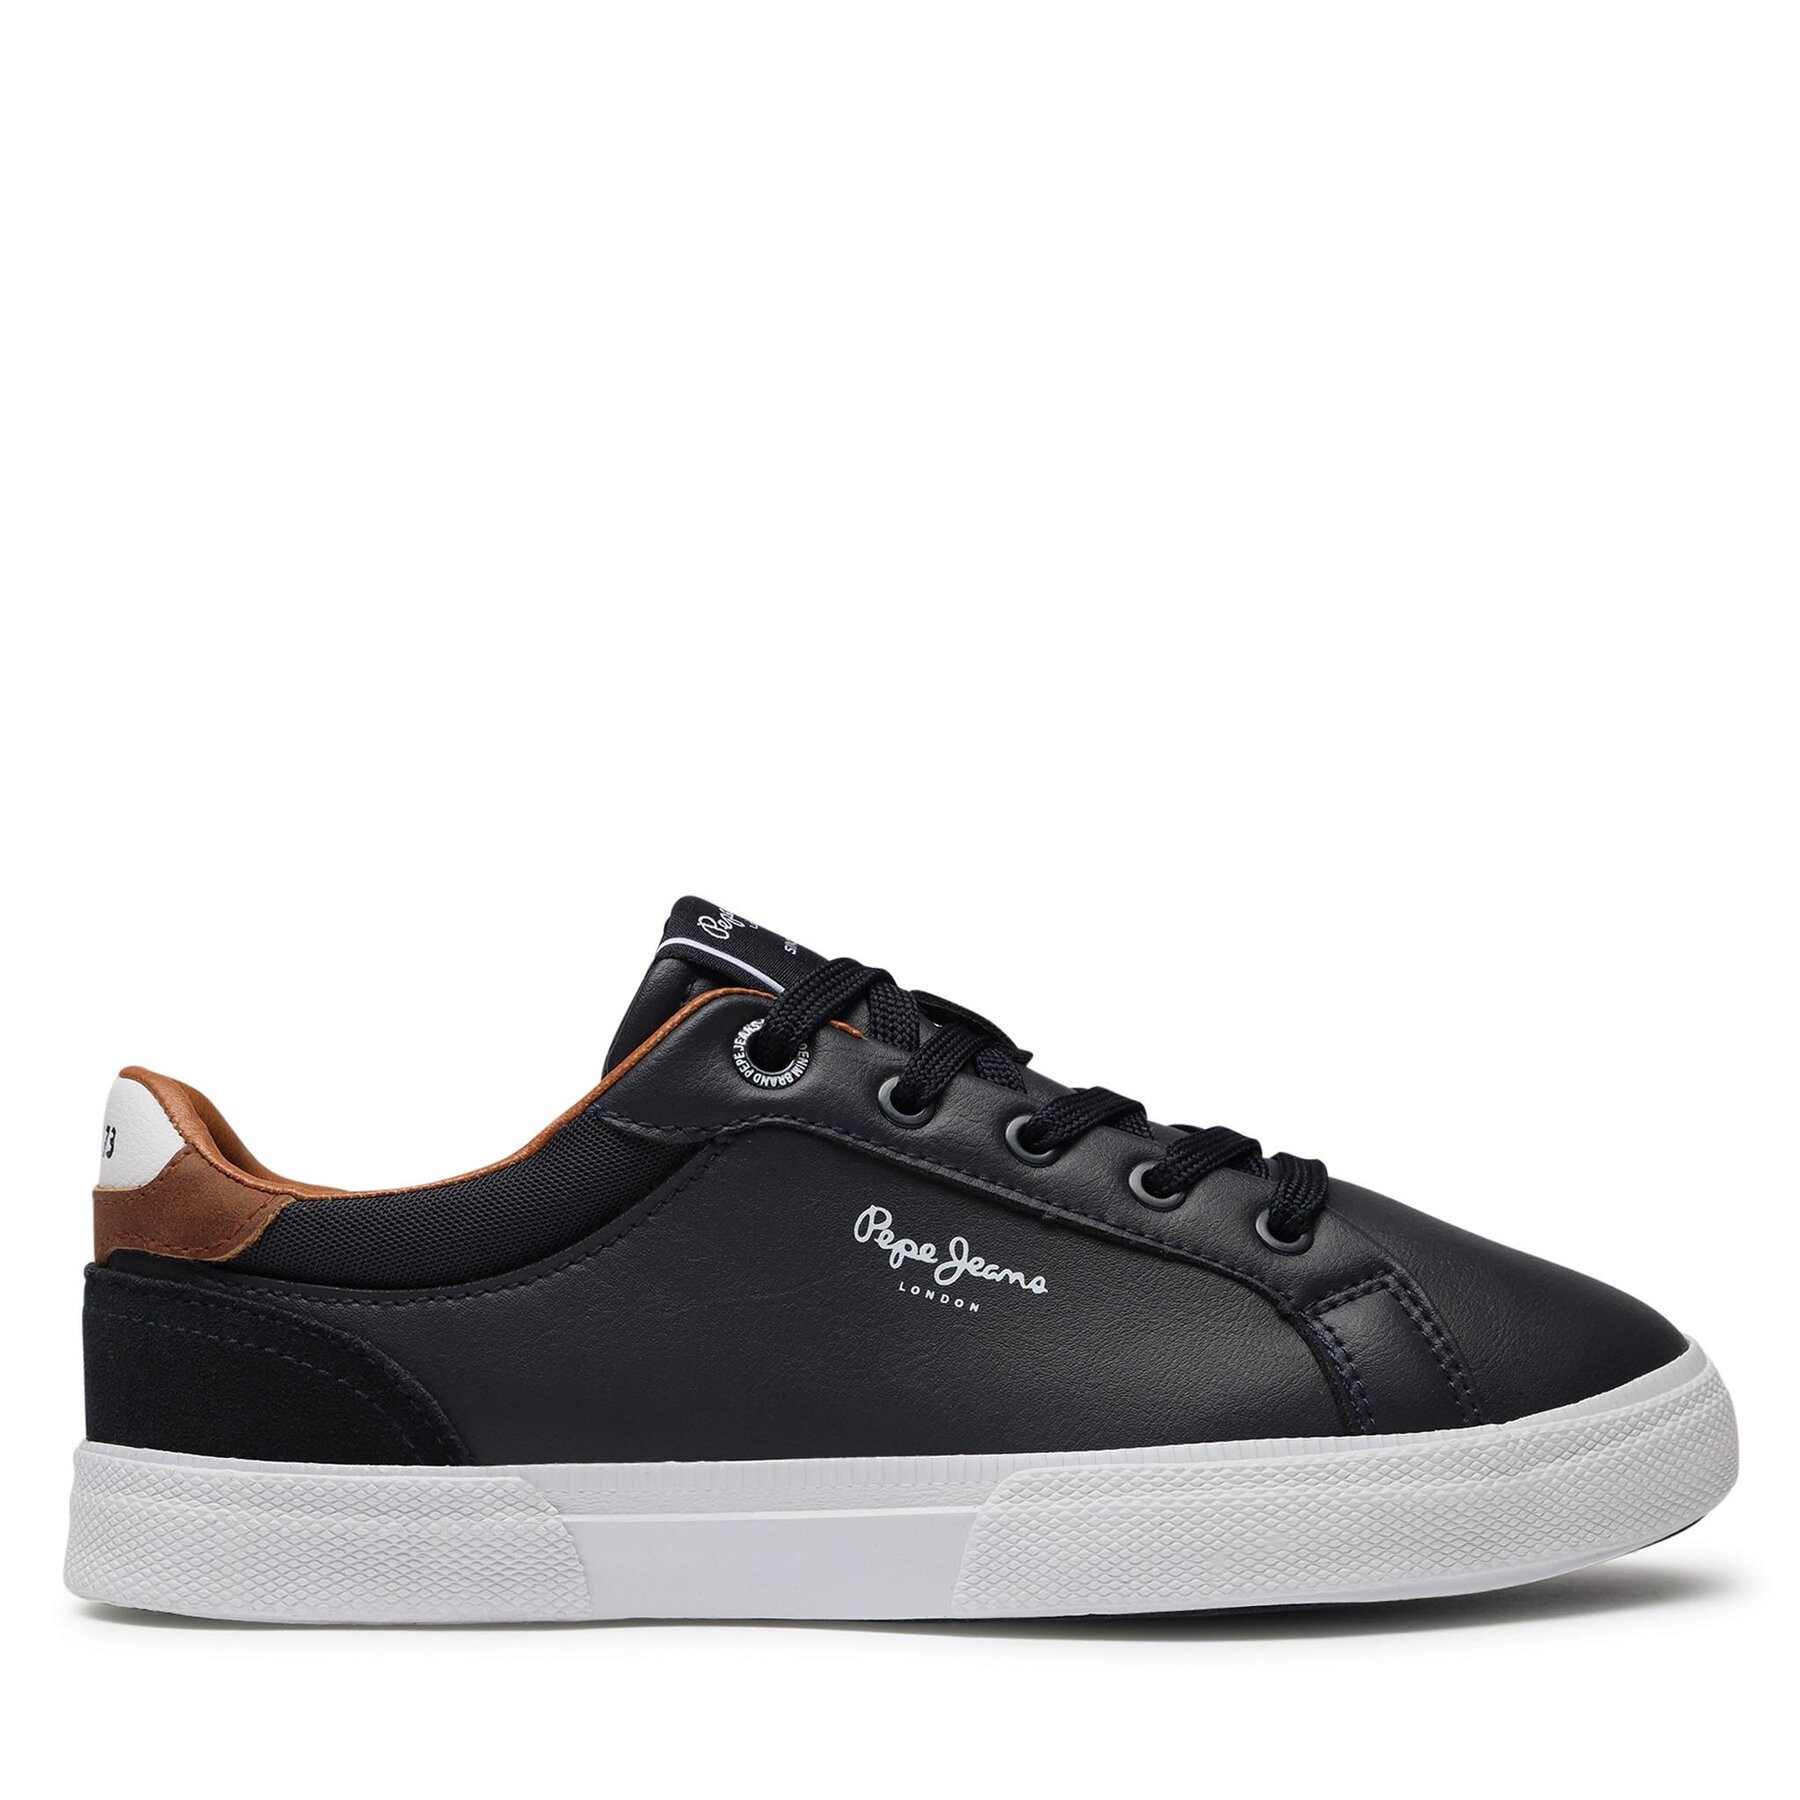 Sneakers Pepe Jeans PBS30569 Navy 595 von Pepe Jeans